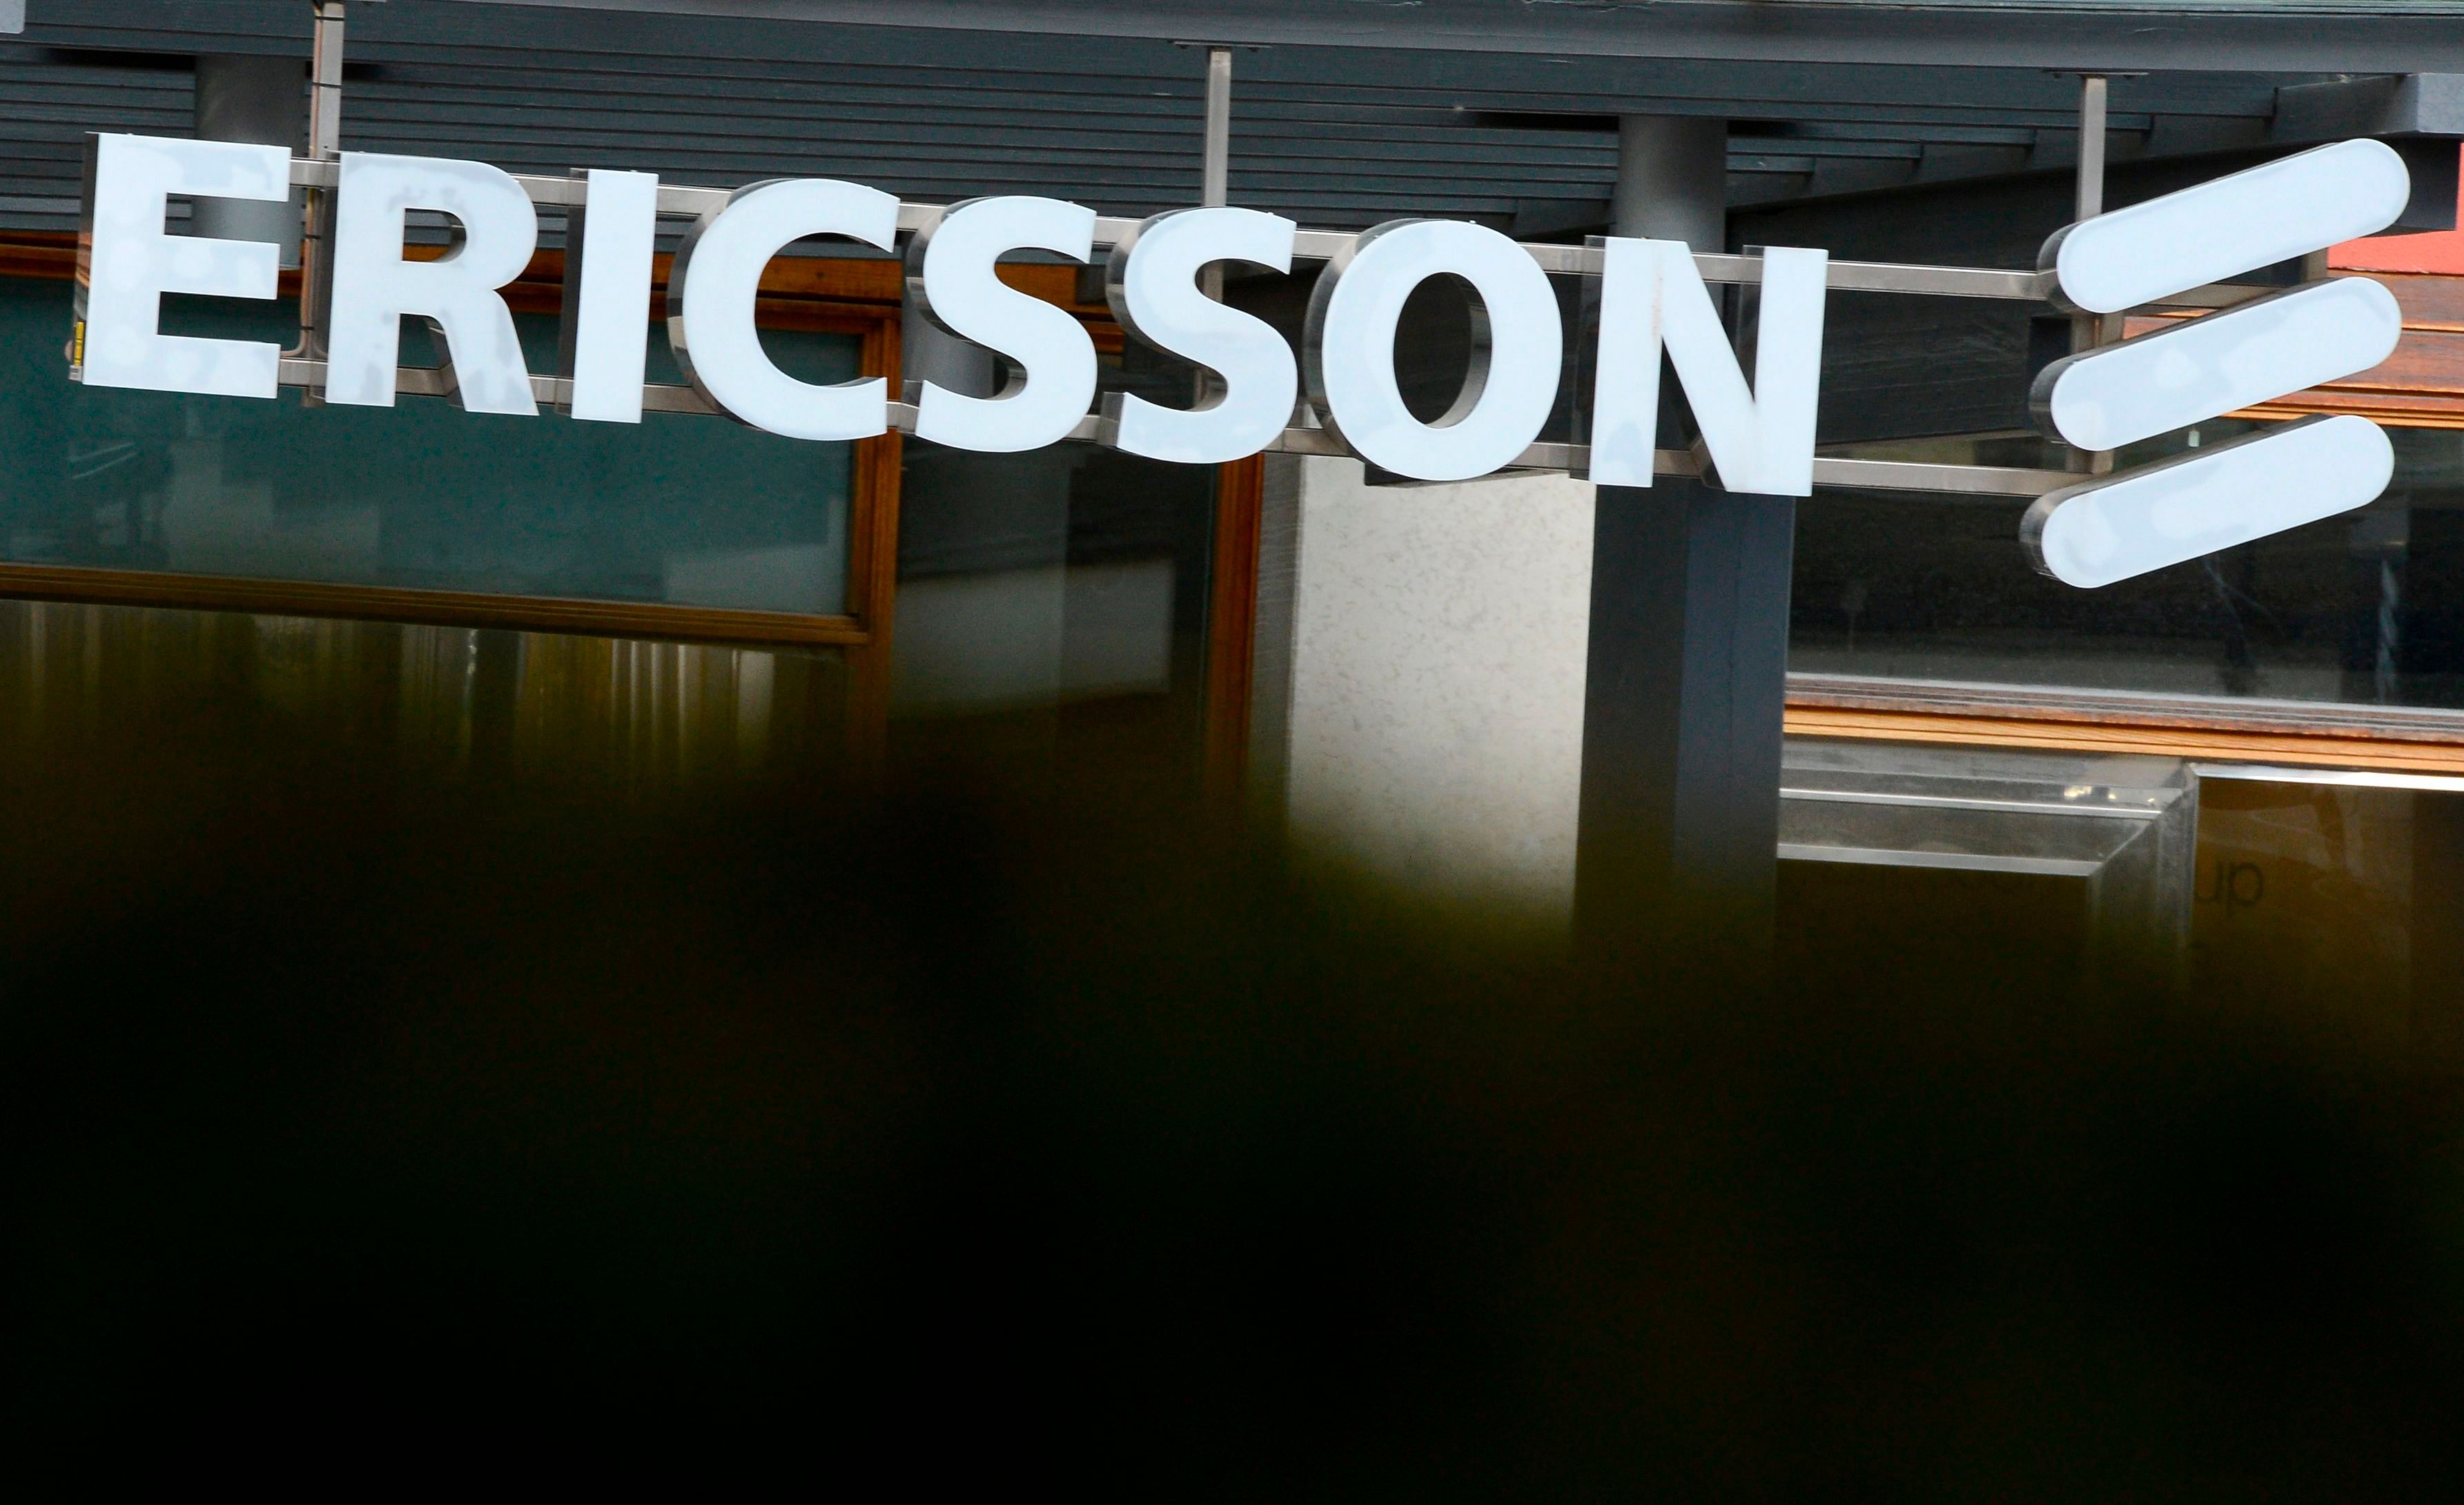 Swedish provider of telecommunications equipment and data communication systems giant Ericsson logo at the Ericsson headquarters in Stockholm's suburb of Kista. (AFP Photo)